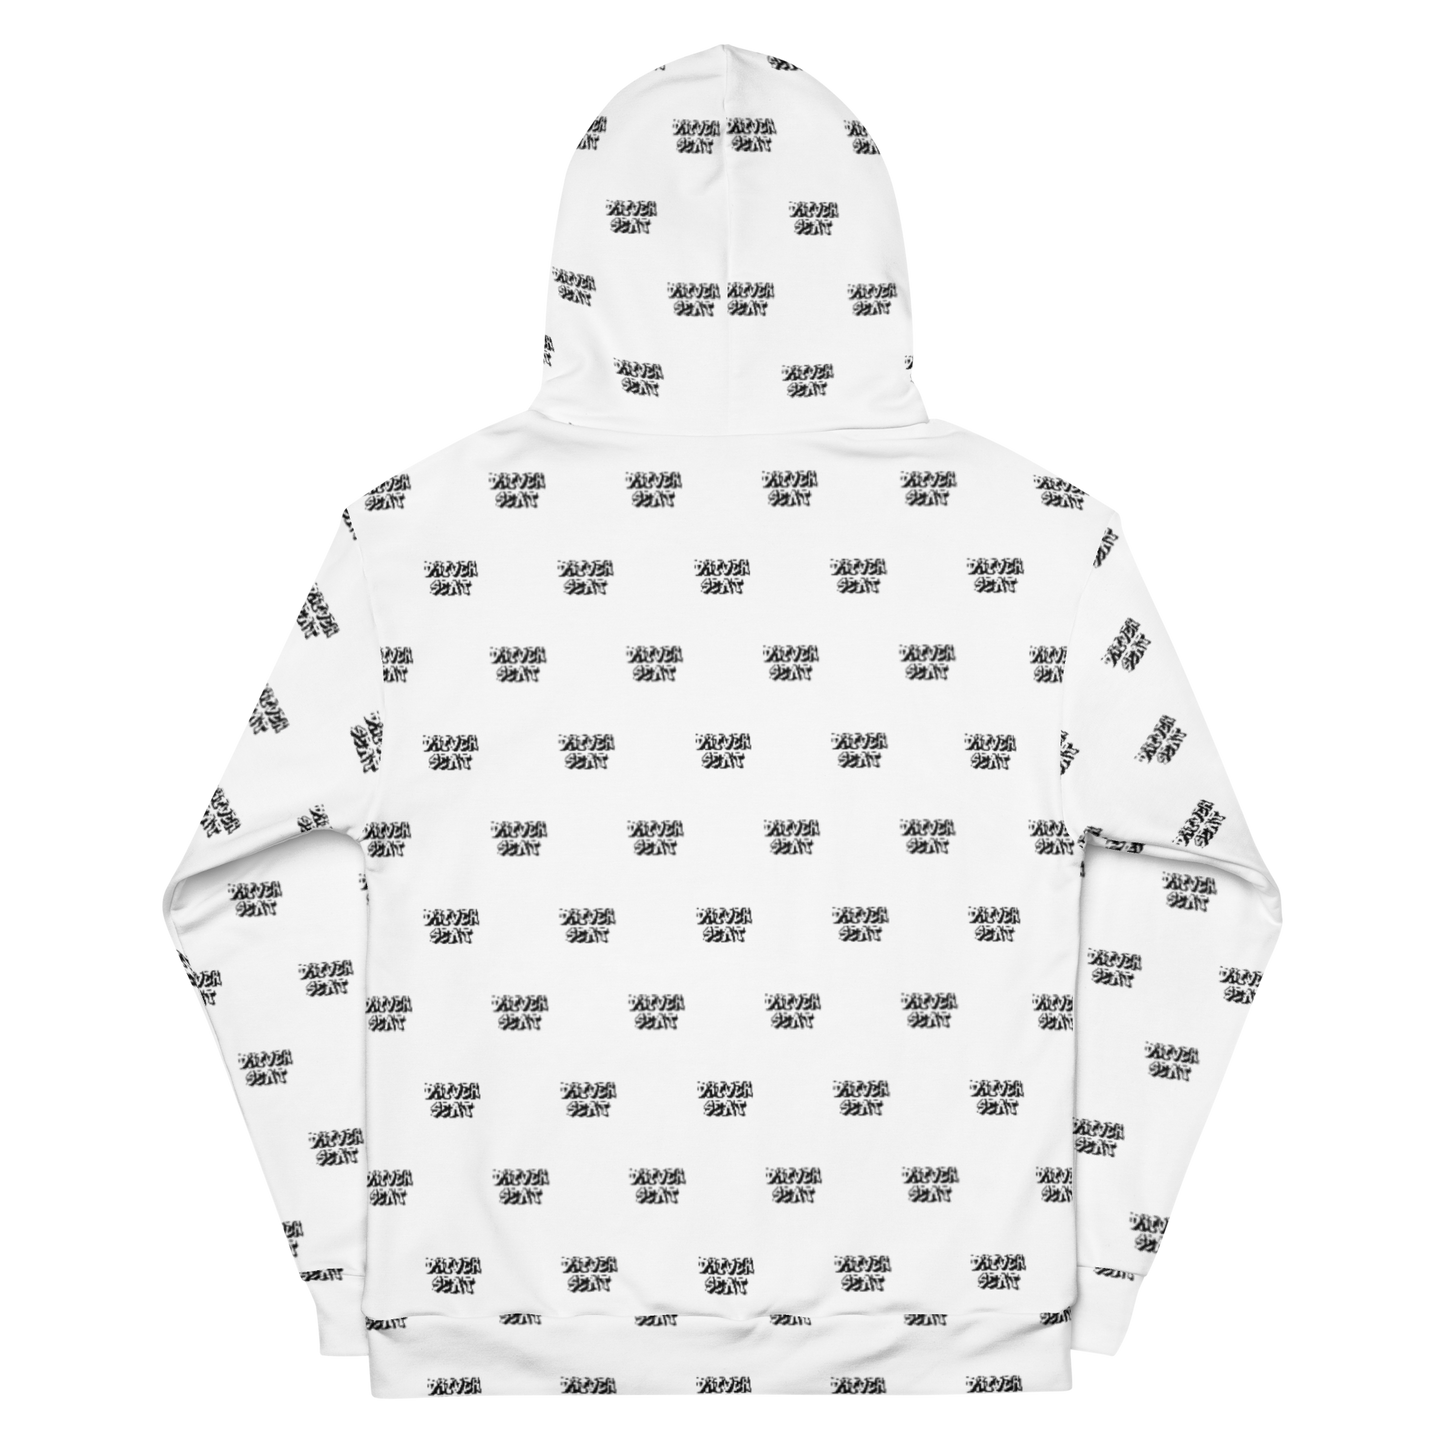 All Over Logo Hoodie - White